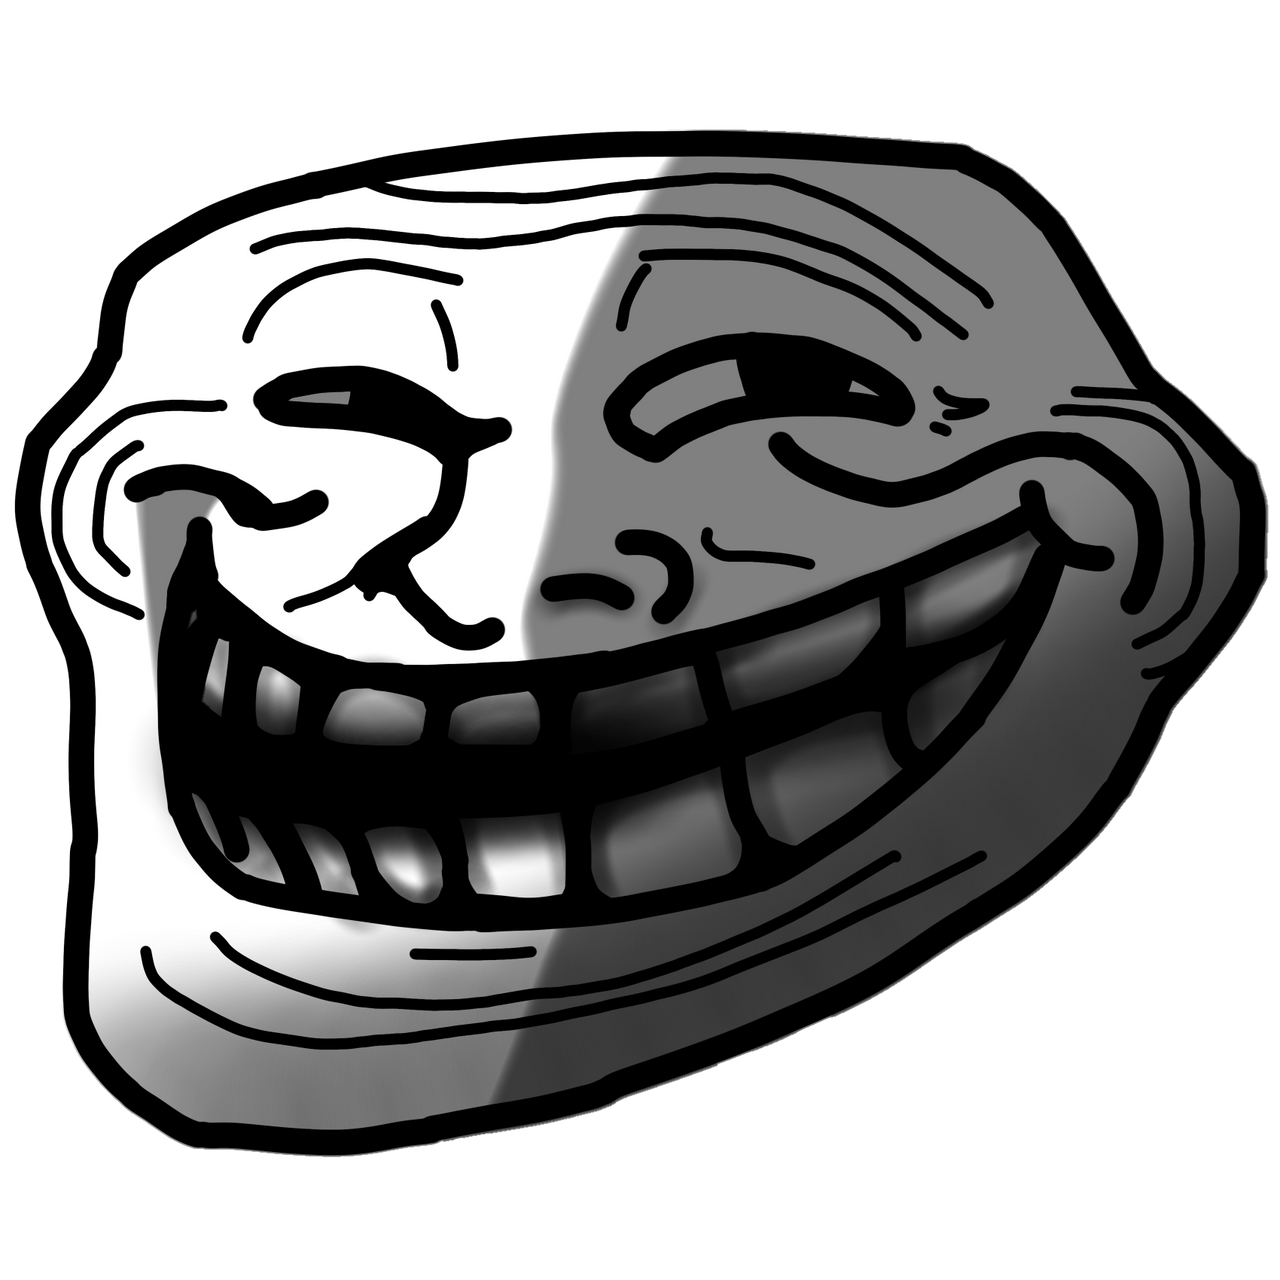 Giant troll face from roblox